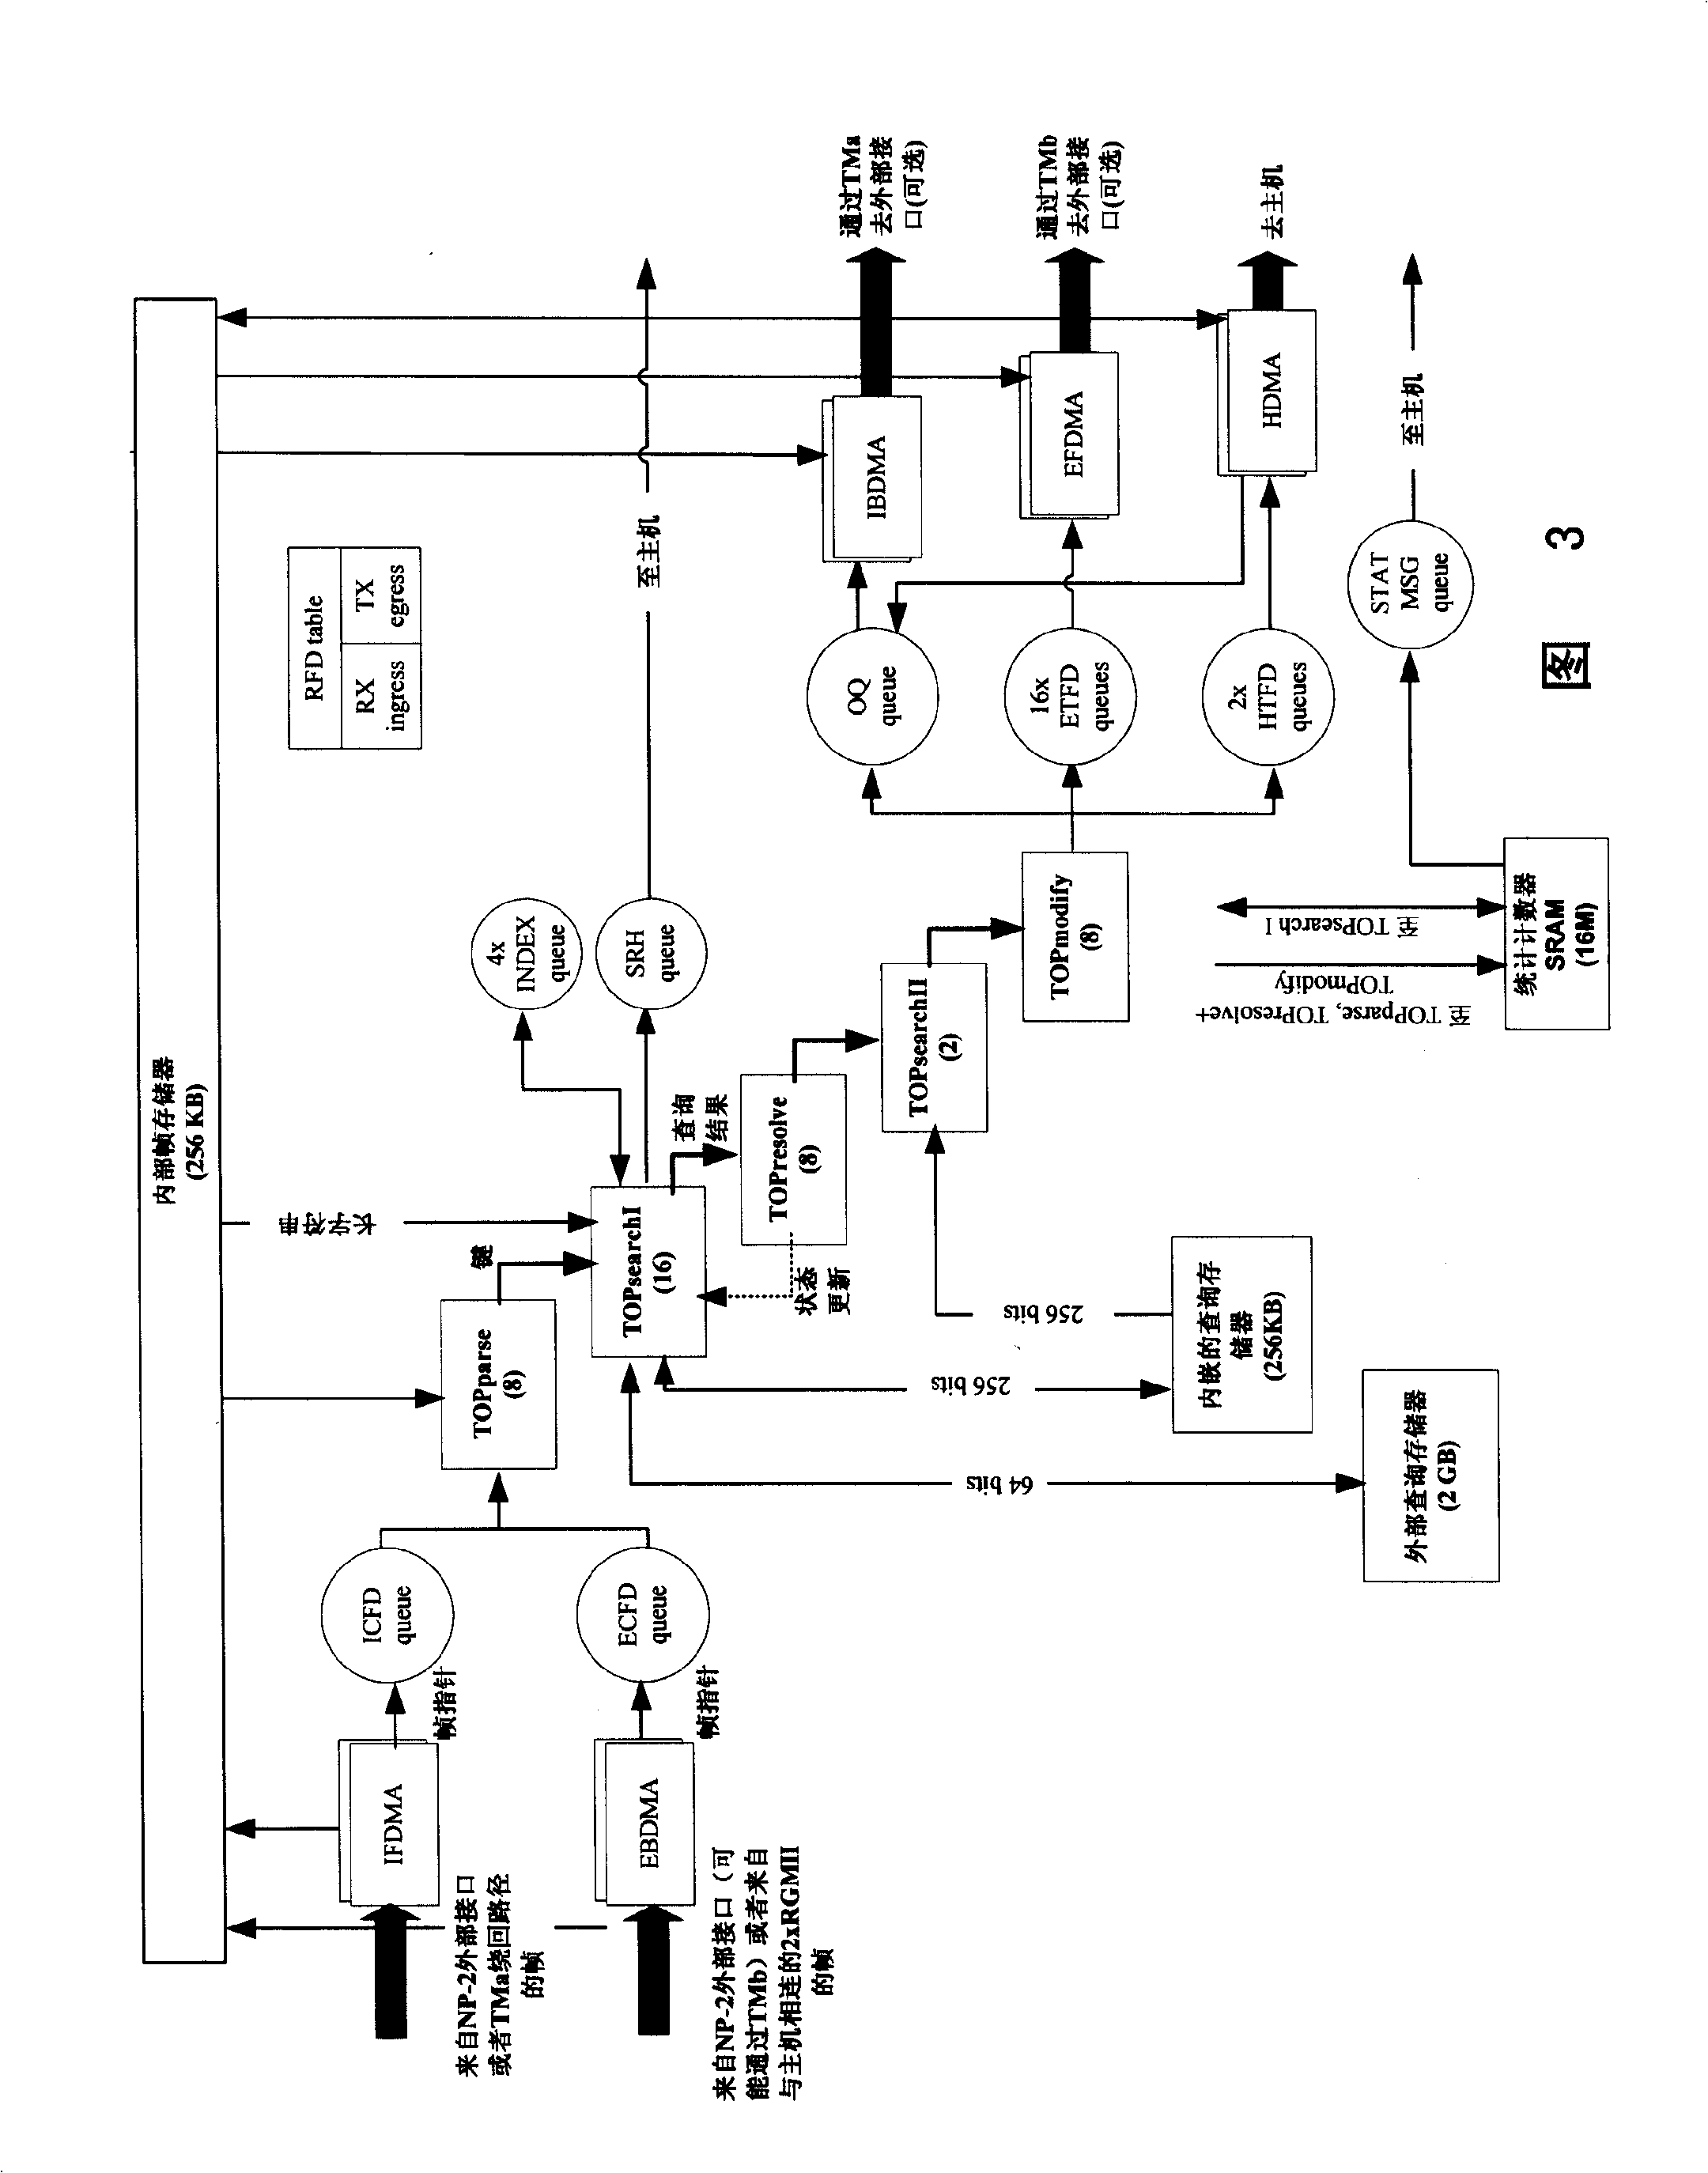 Tunnel packet processing method for implementing IPv6 traversing IPv4 based on network processor